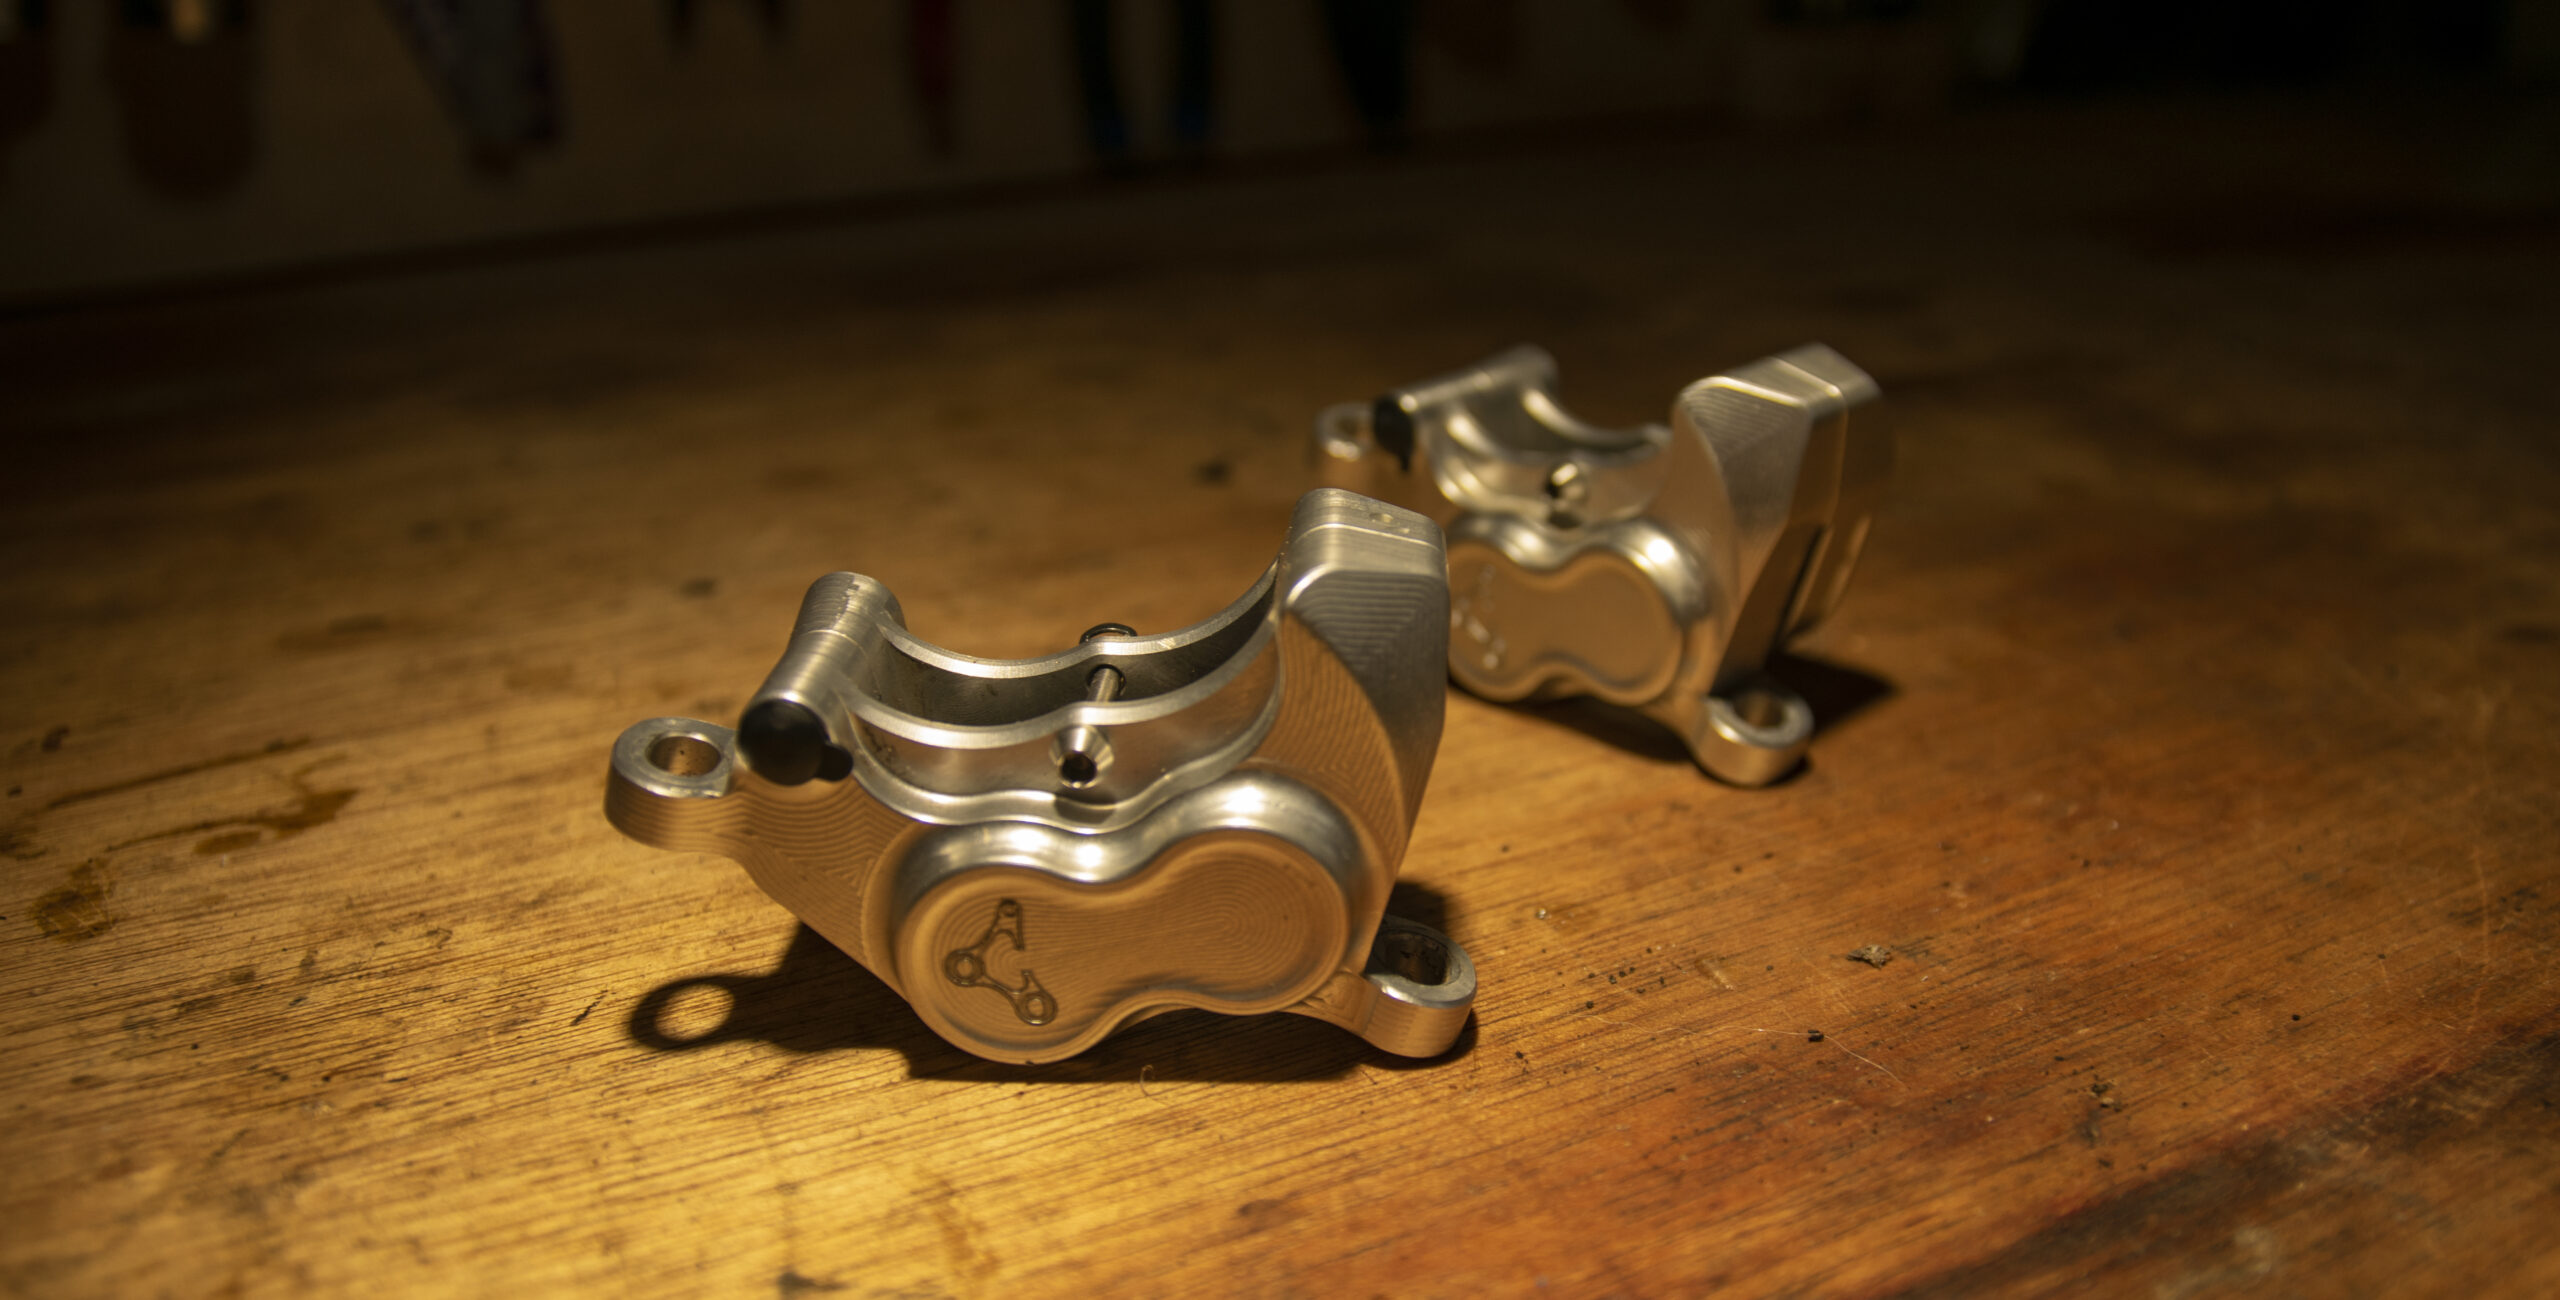 David Golay reviews the Cascade Components North Fork brake calipers for Blister